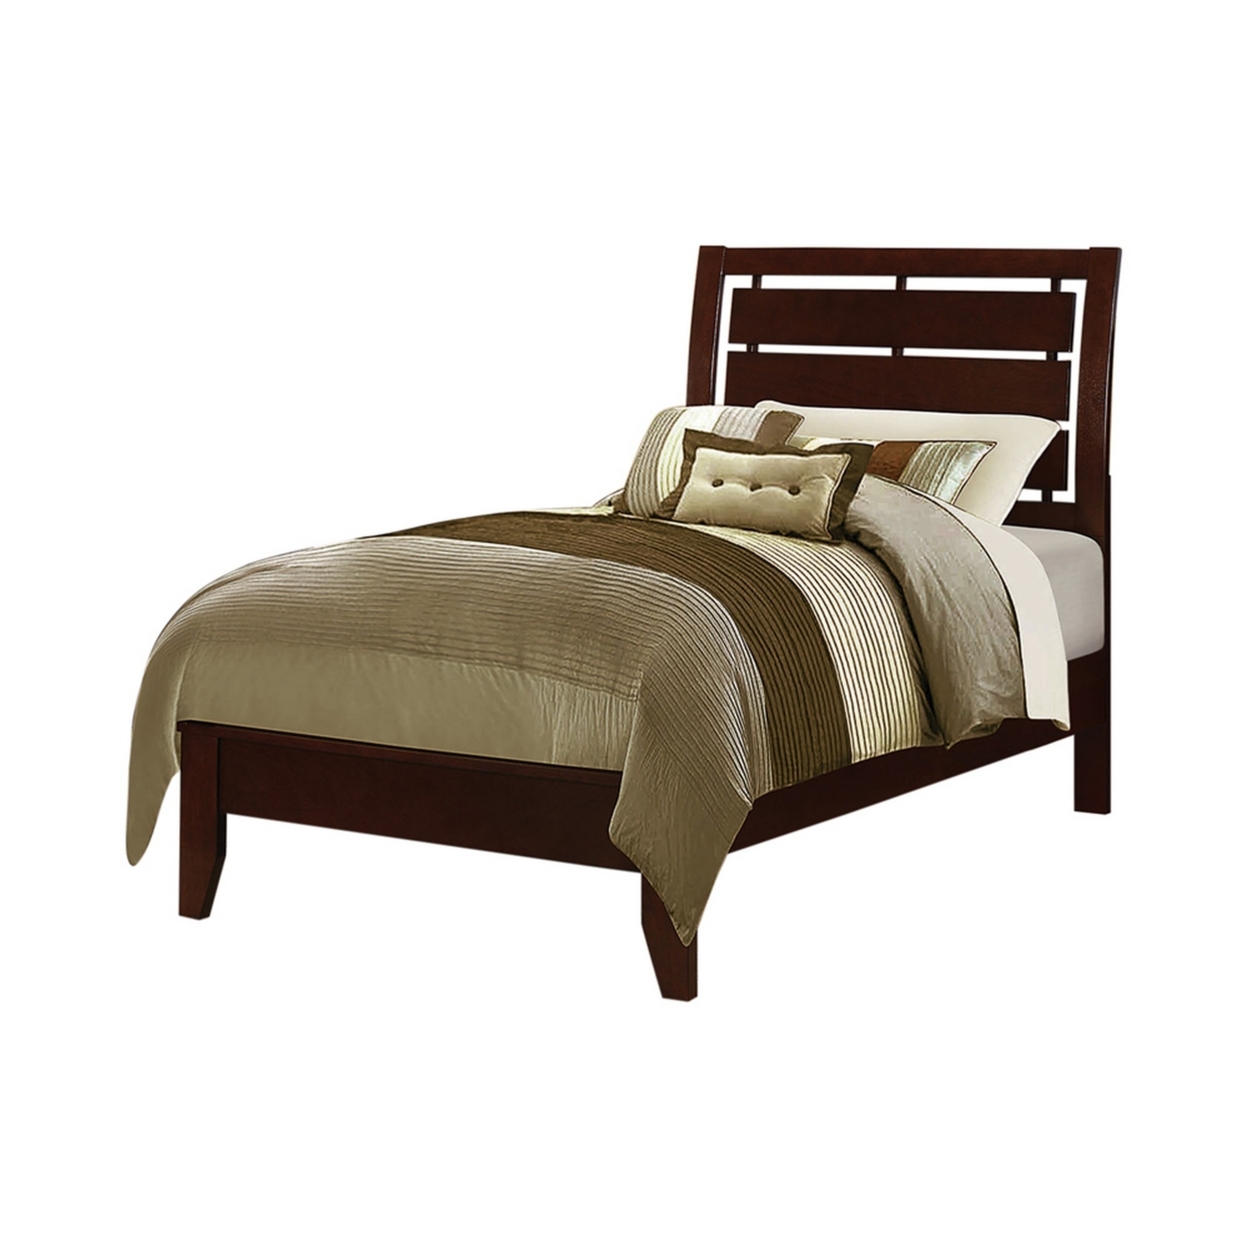 Wooden Frame Twin Size Bed With Cut Out Panel Headboard, Brown- Saltoro Sherpi